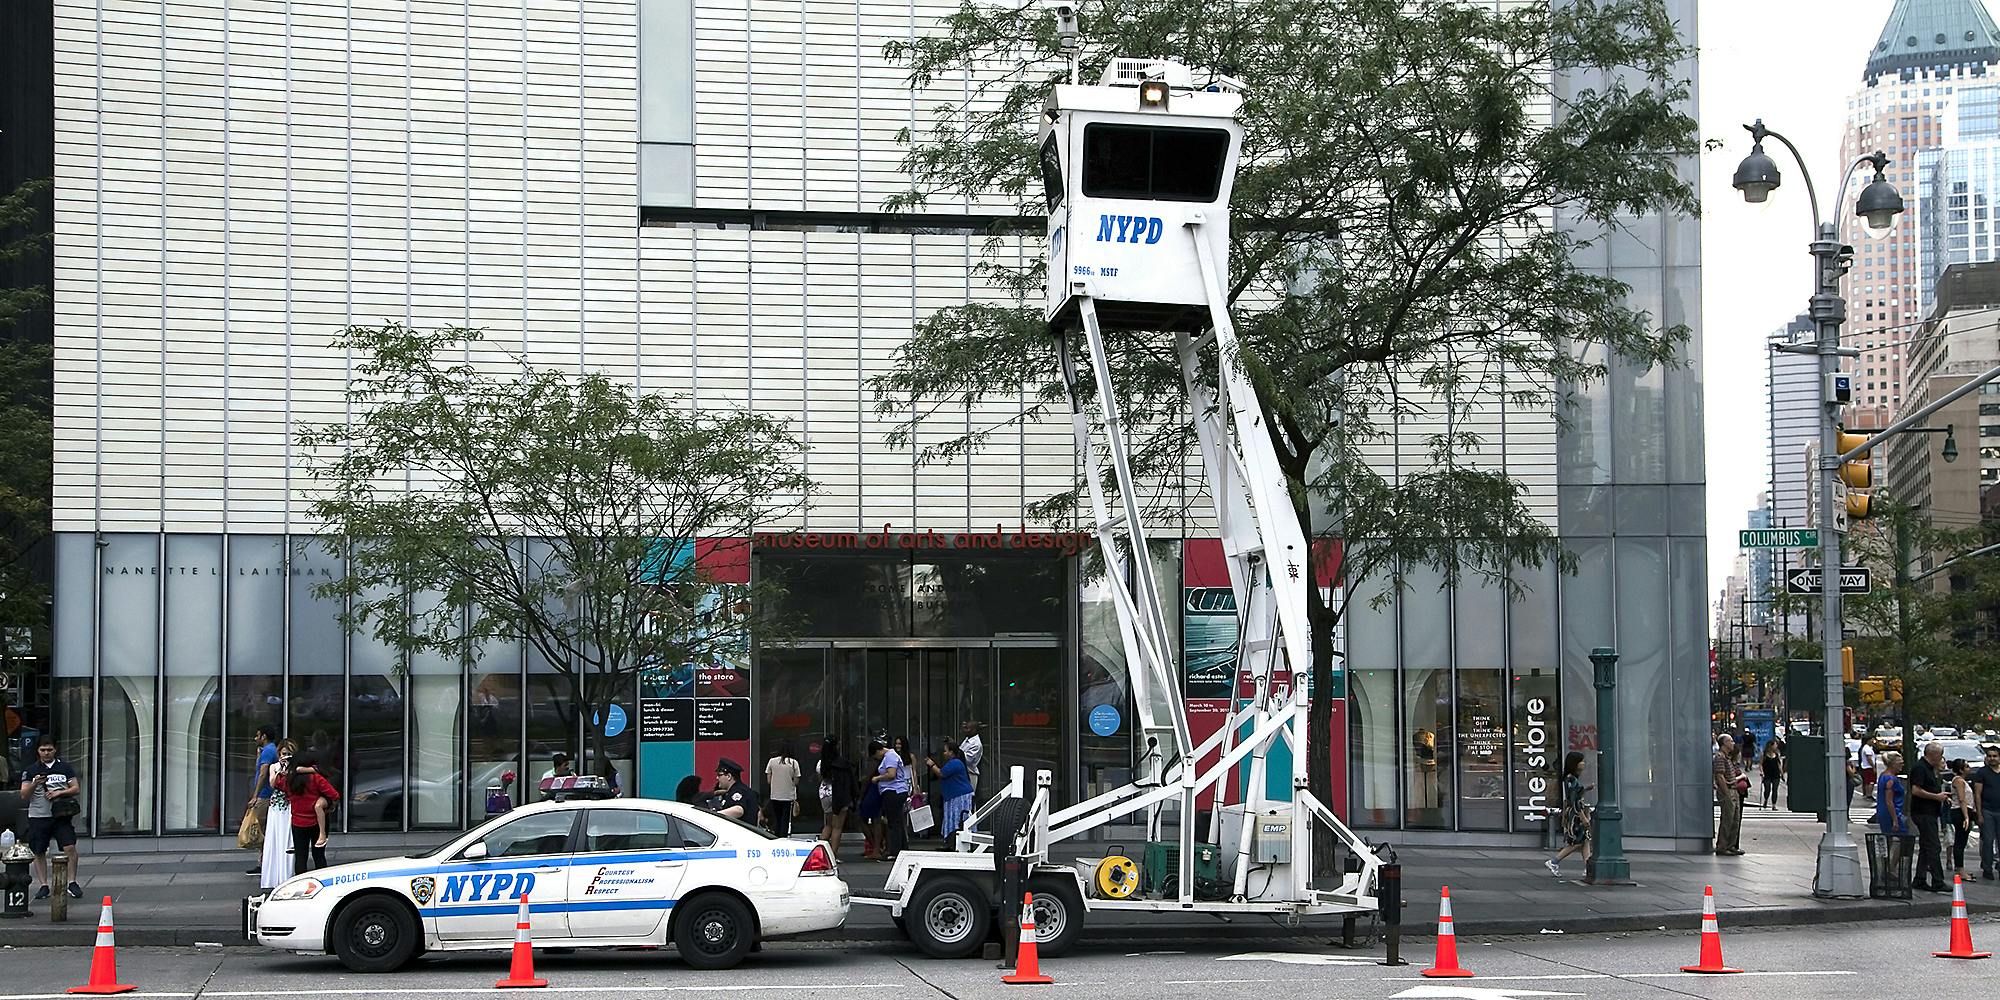 A NYPD car and surveillance tower.